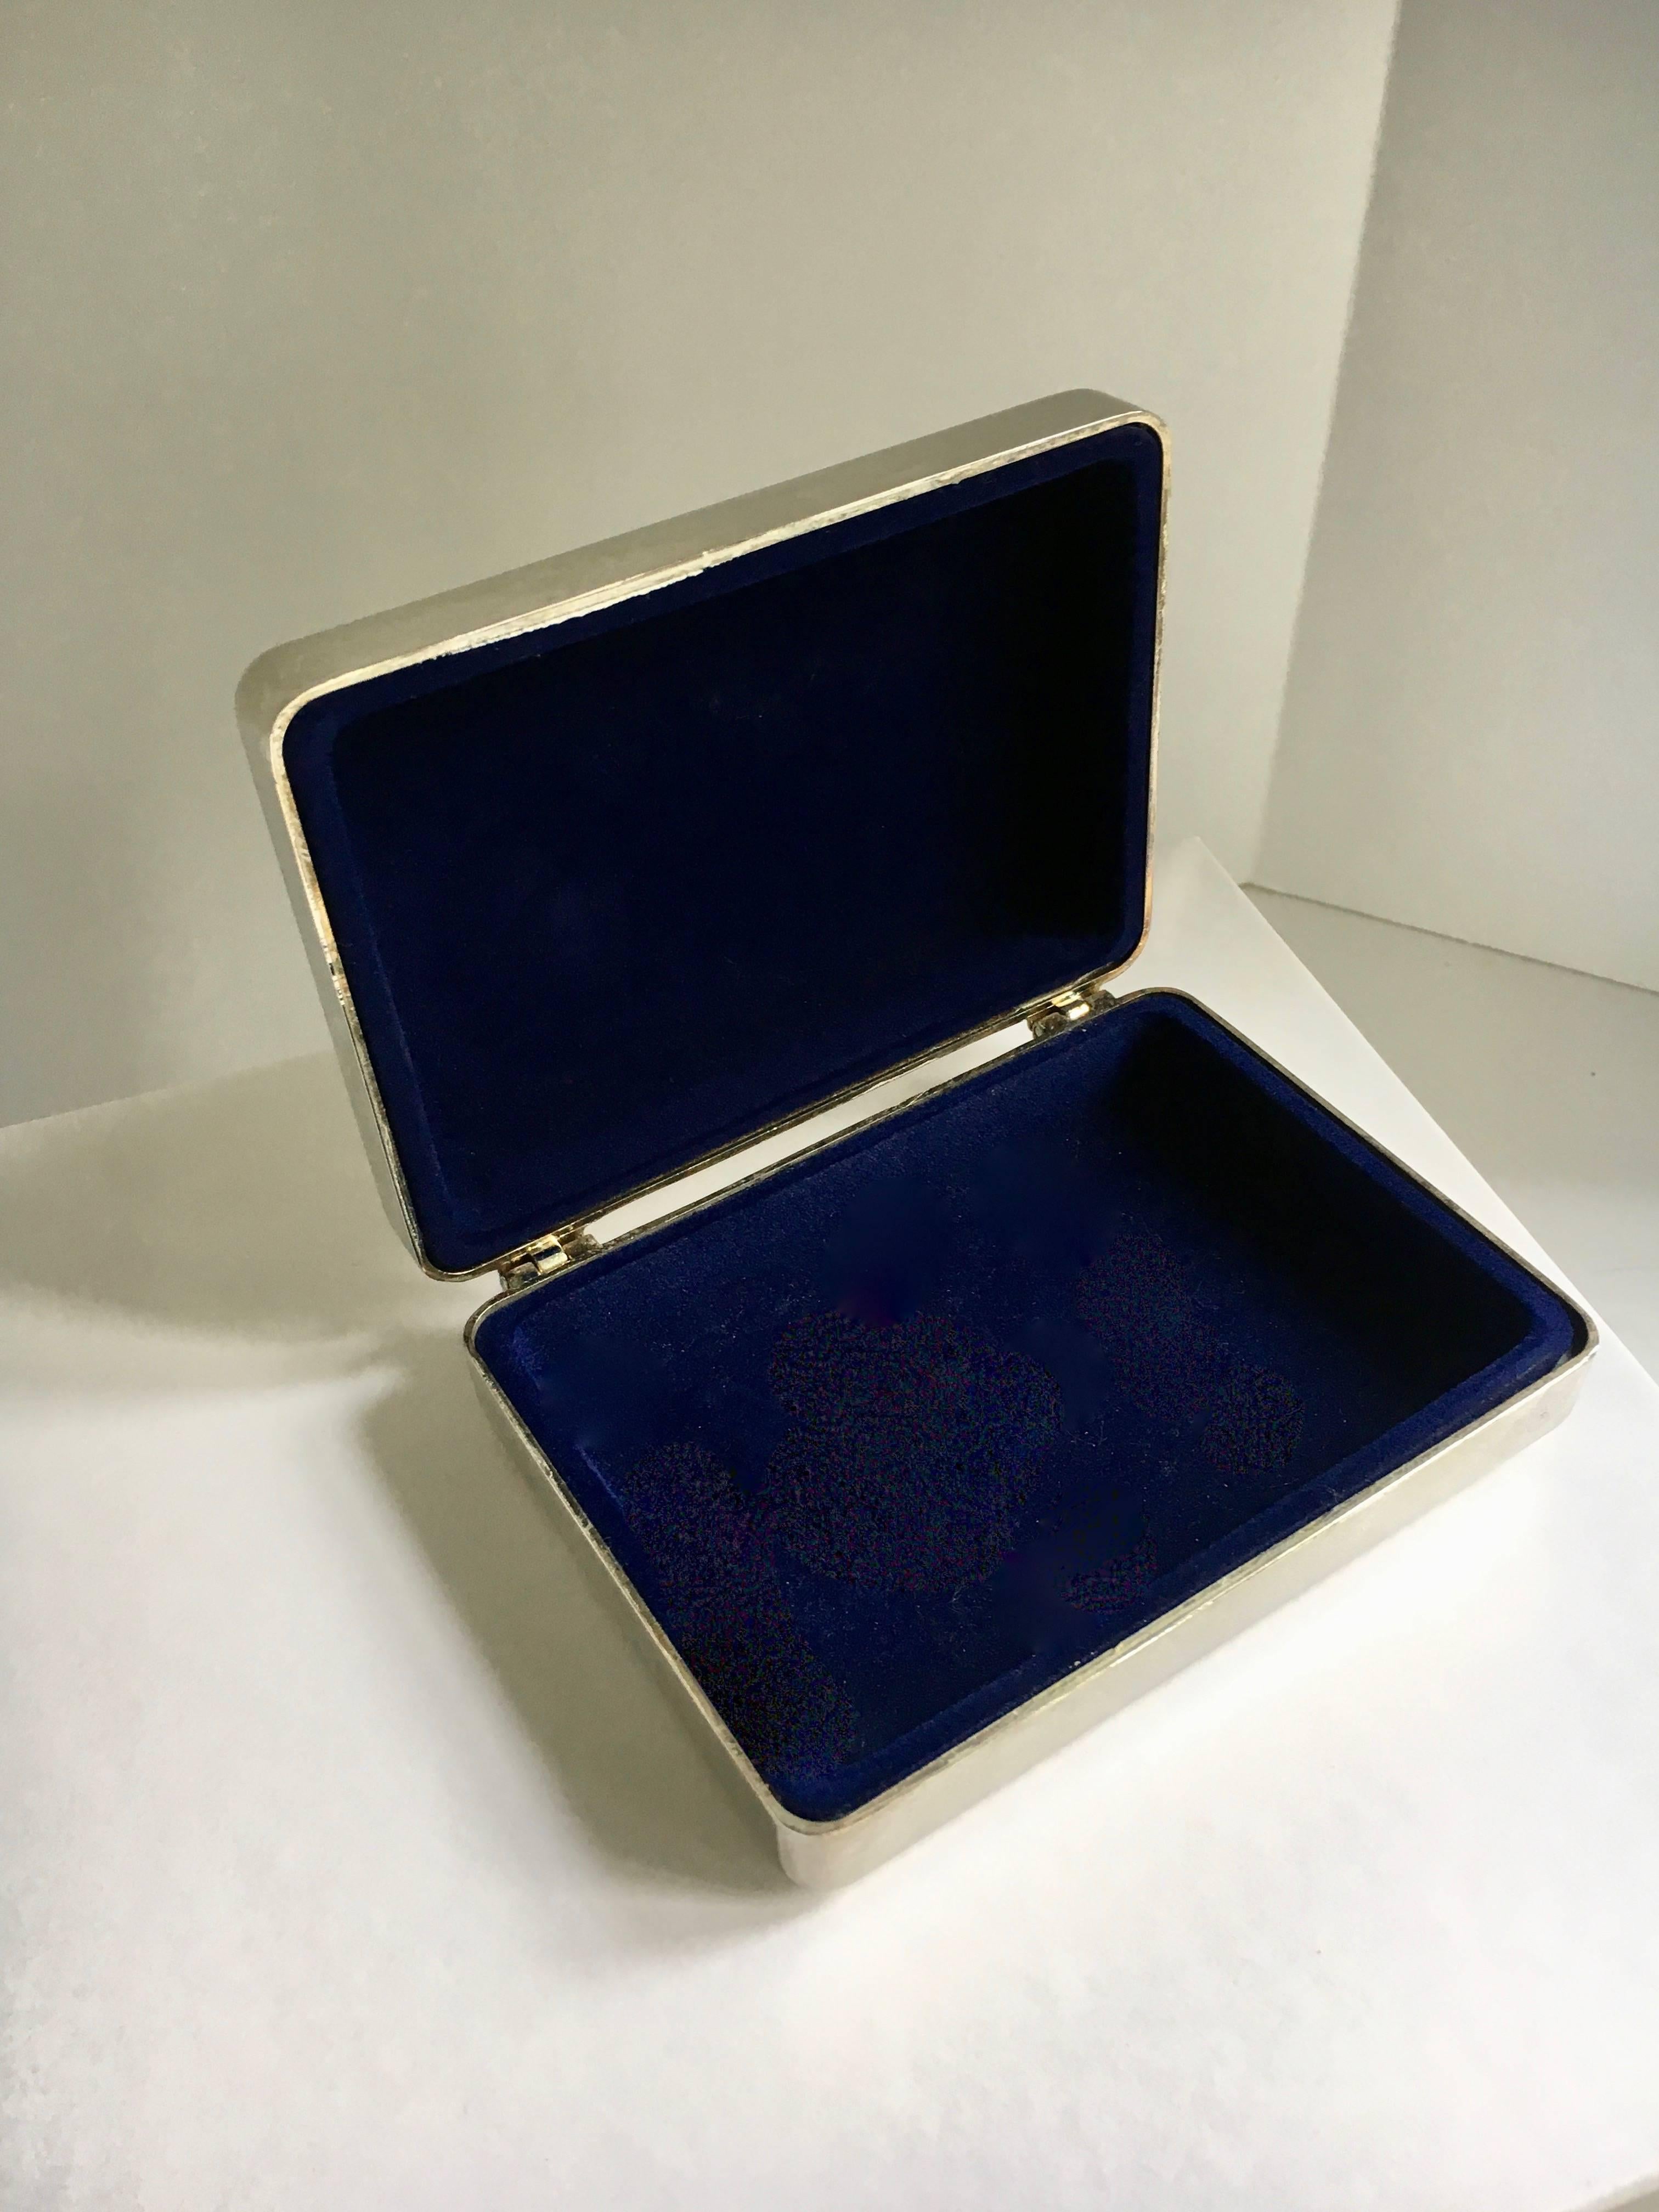 Silver plate box with blue interior a handsome box, perfect for storing everything from daily items, mementos, to Jewelry for home or travel - a lovely and sophisticated box for any room or dressing table.